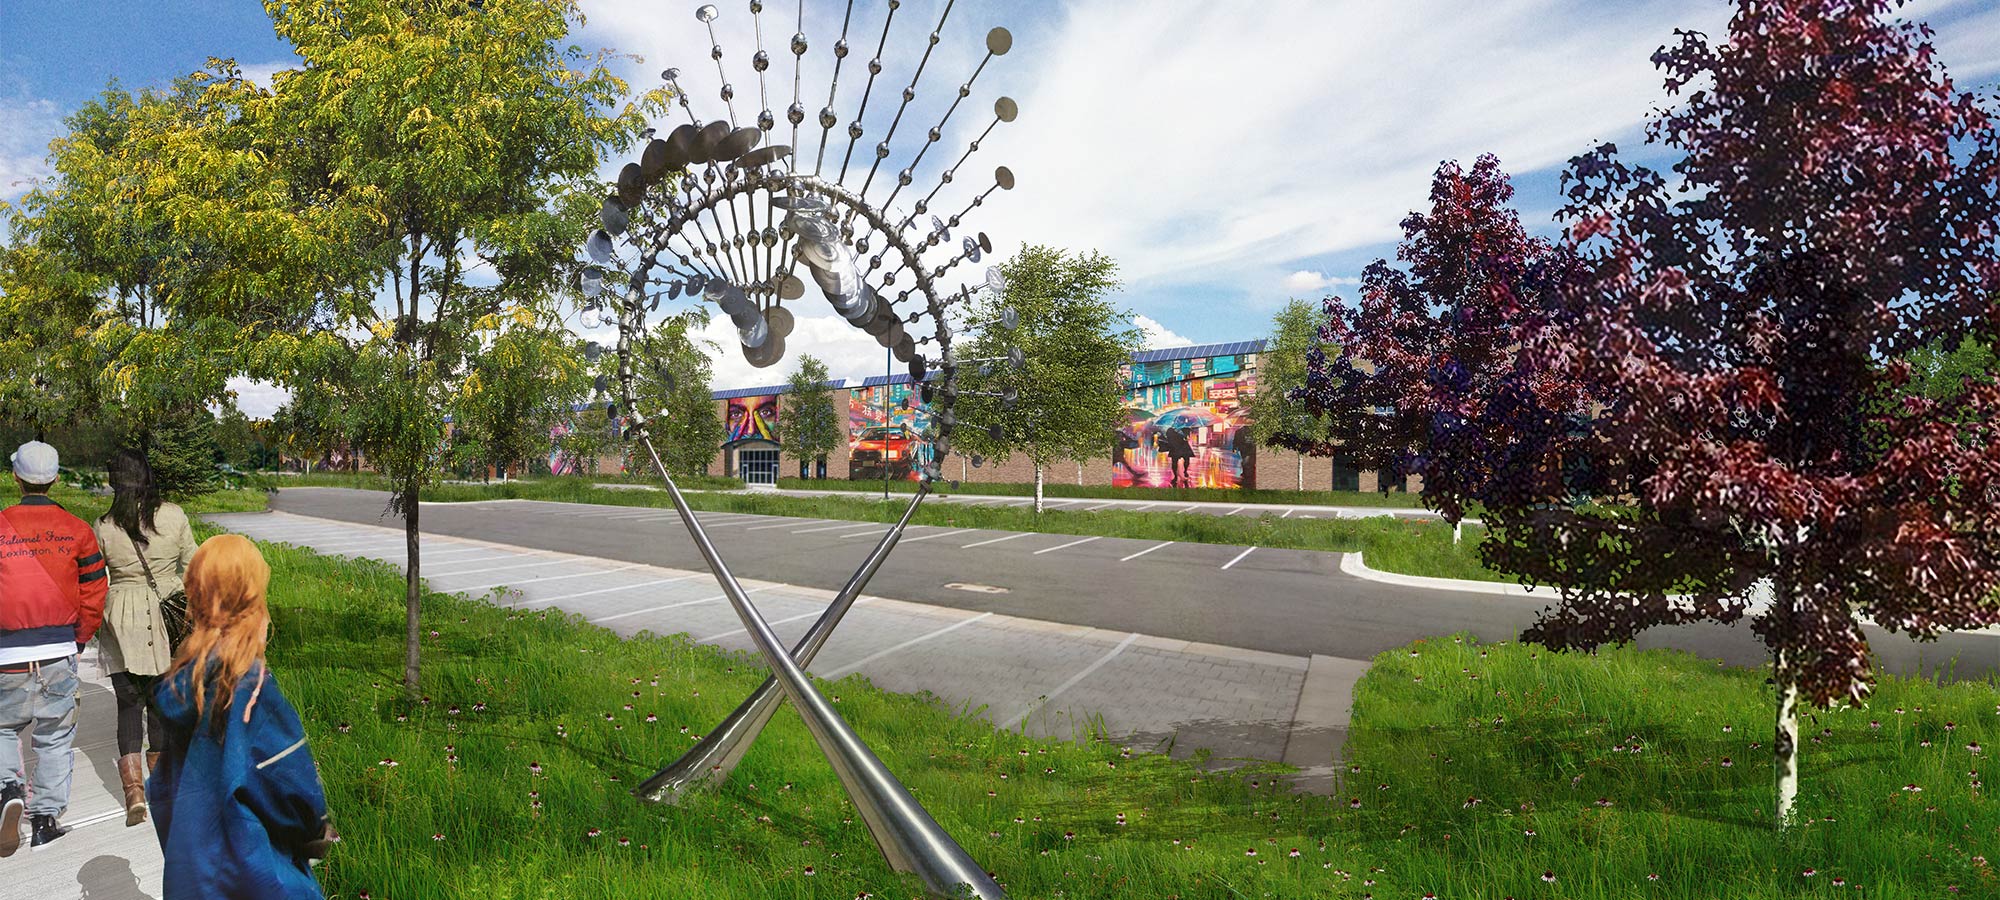 computer rendering of metal art sculpture on a grassy treelined boulevard next to a parking lot and 1 story building with large graphic images on the exterior